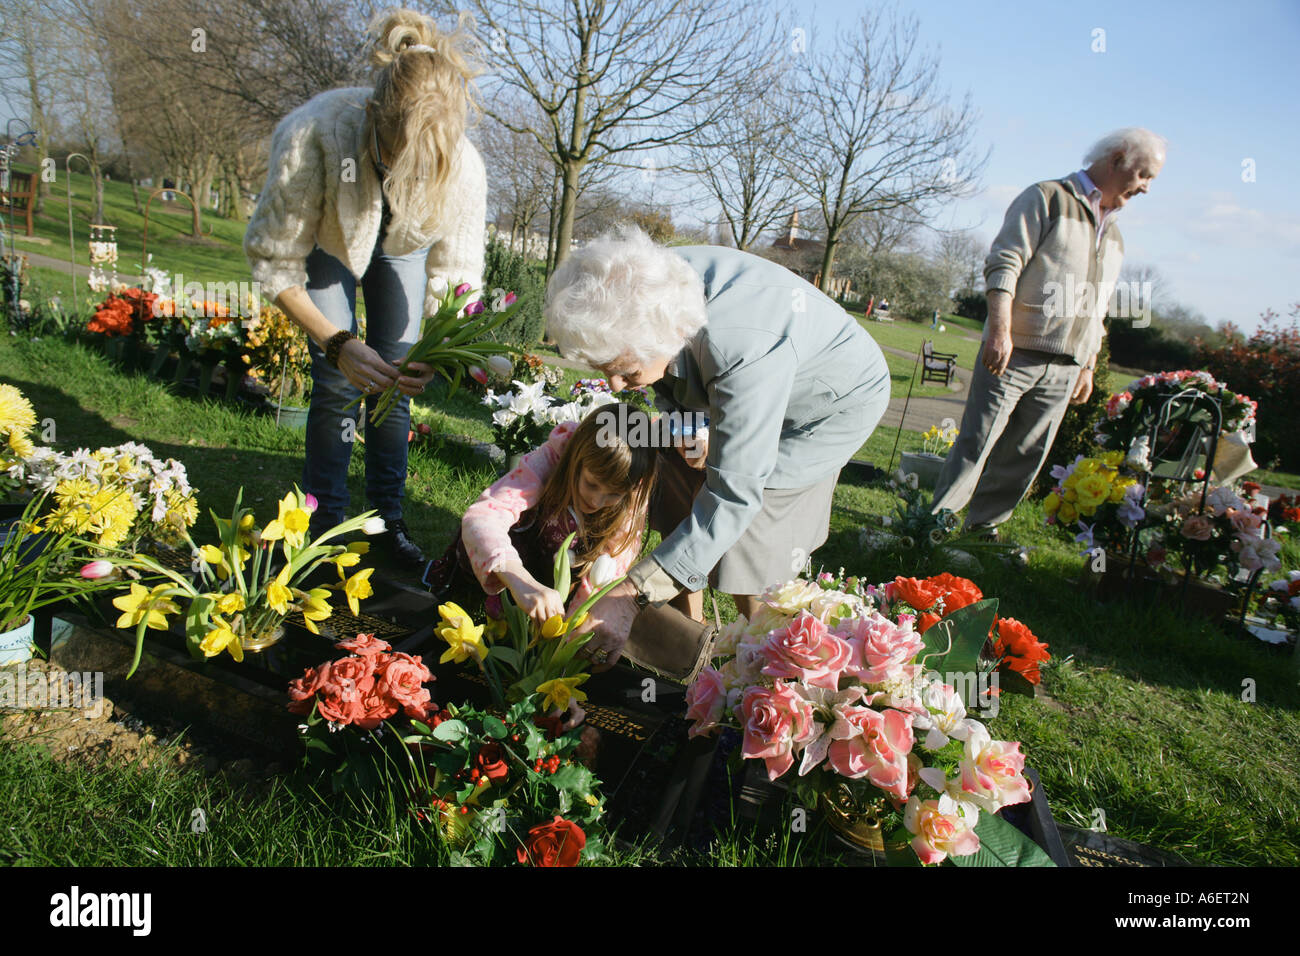 Family members looking after the grave of a loved one at a cemetary, Essex, England, UK. Stock Photo